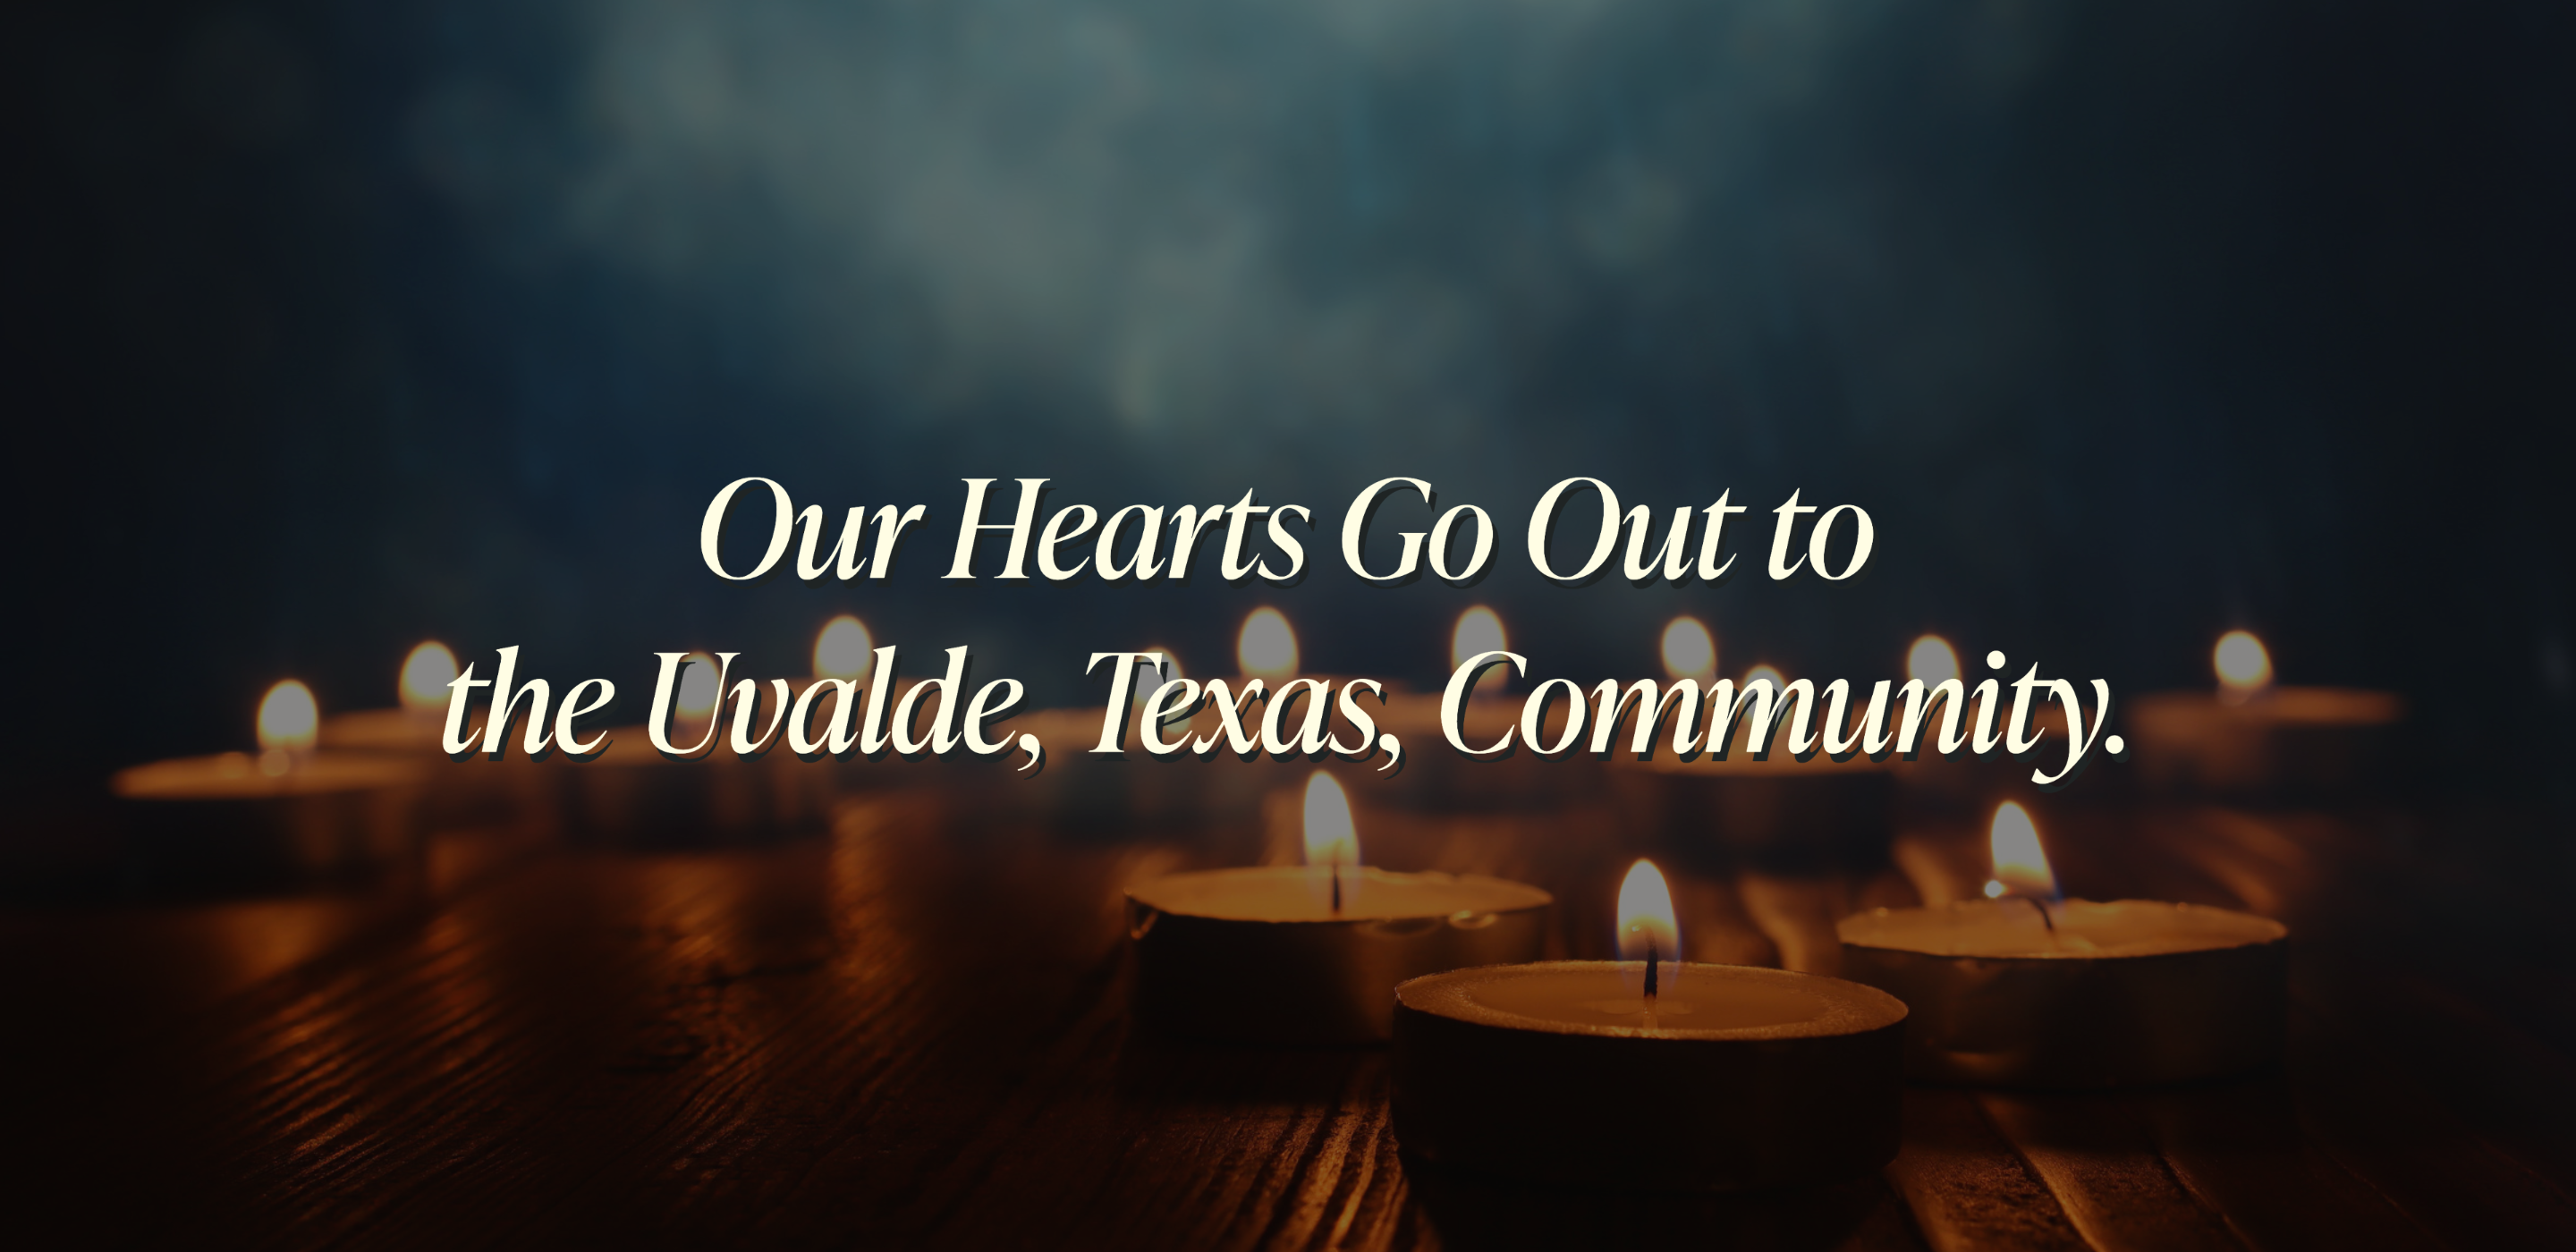 Our Hearts Go Out to the Uvalde, Texas Community.